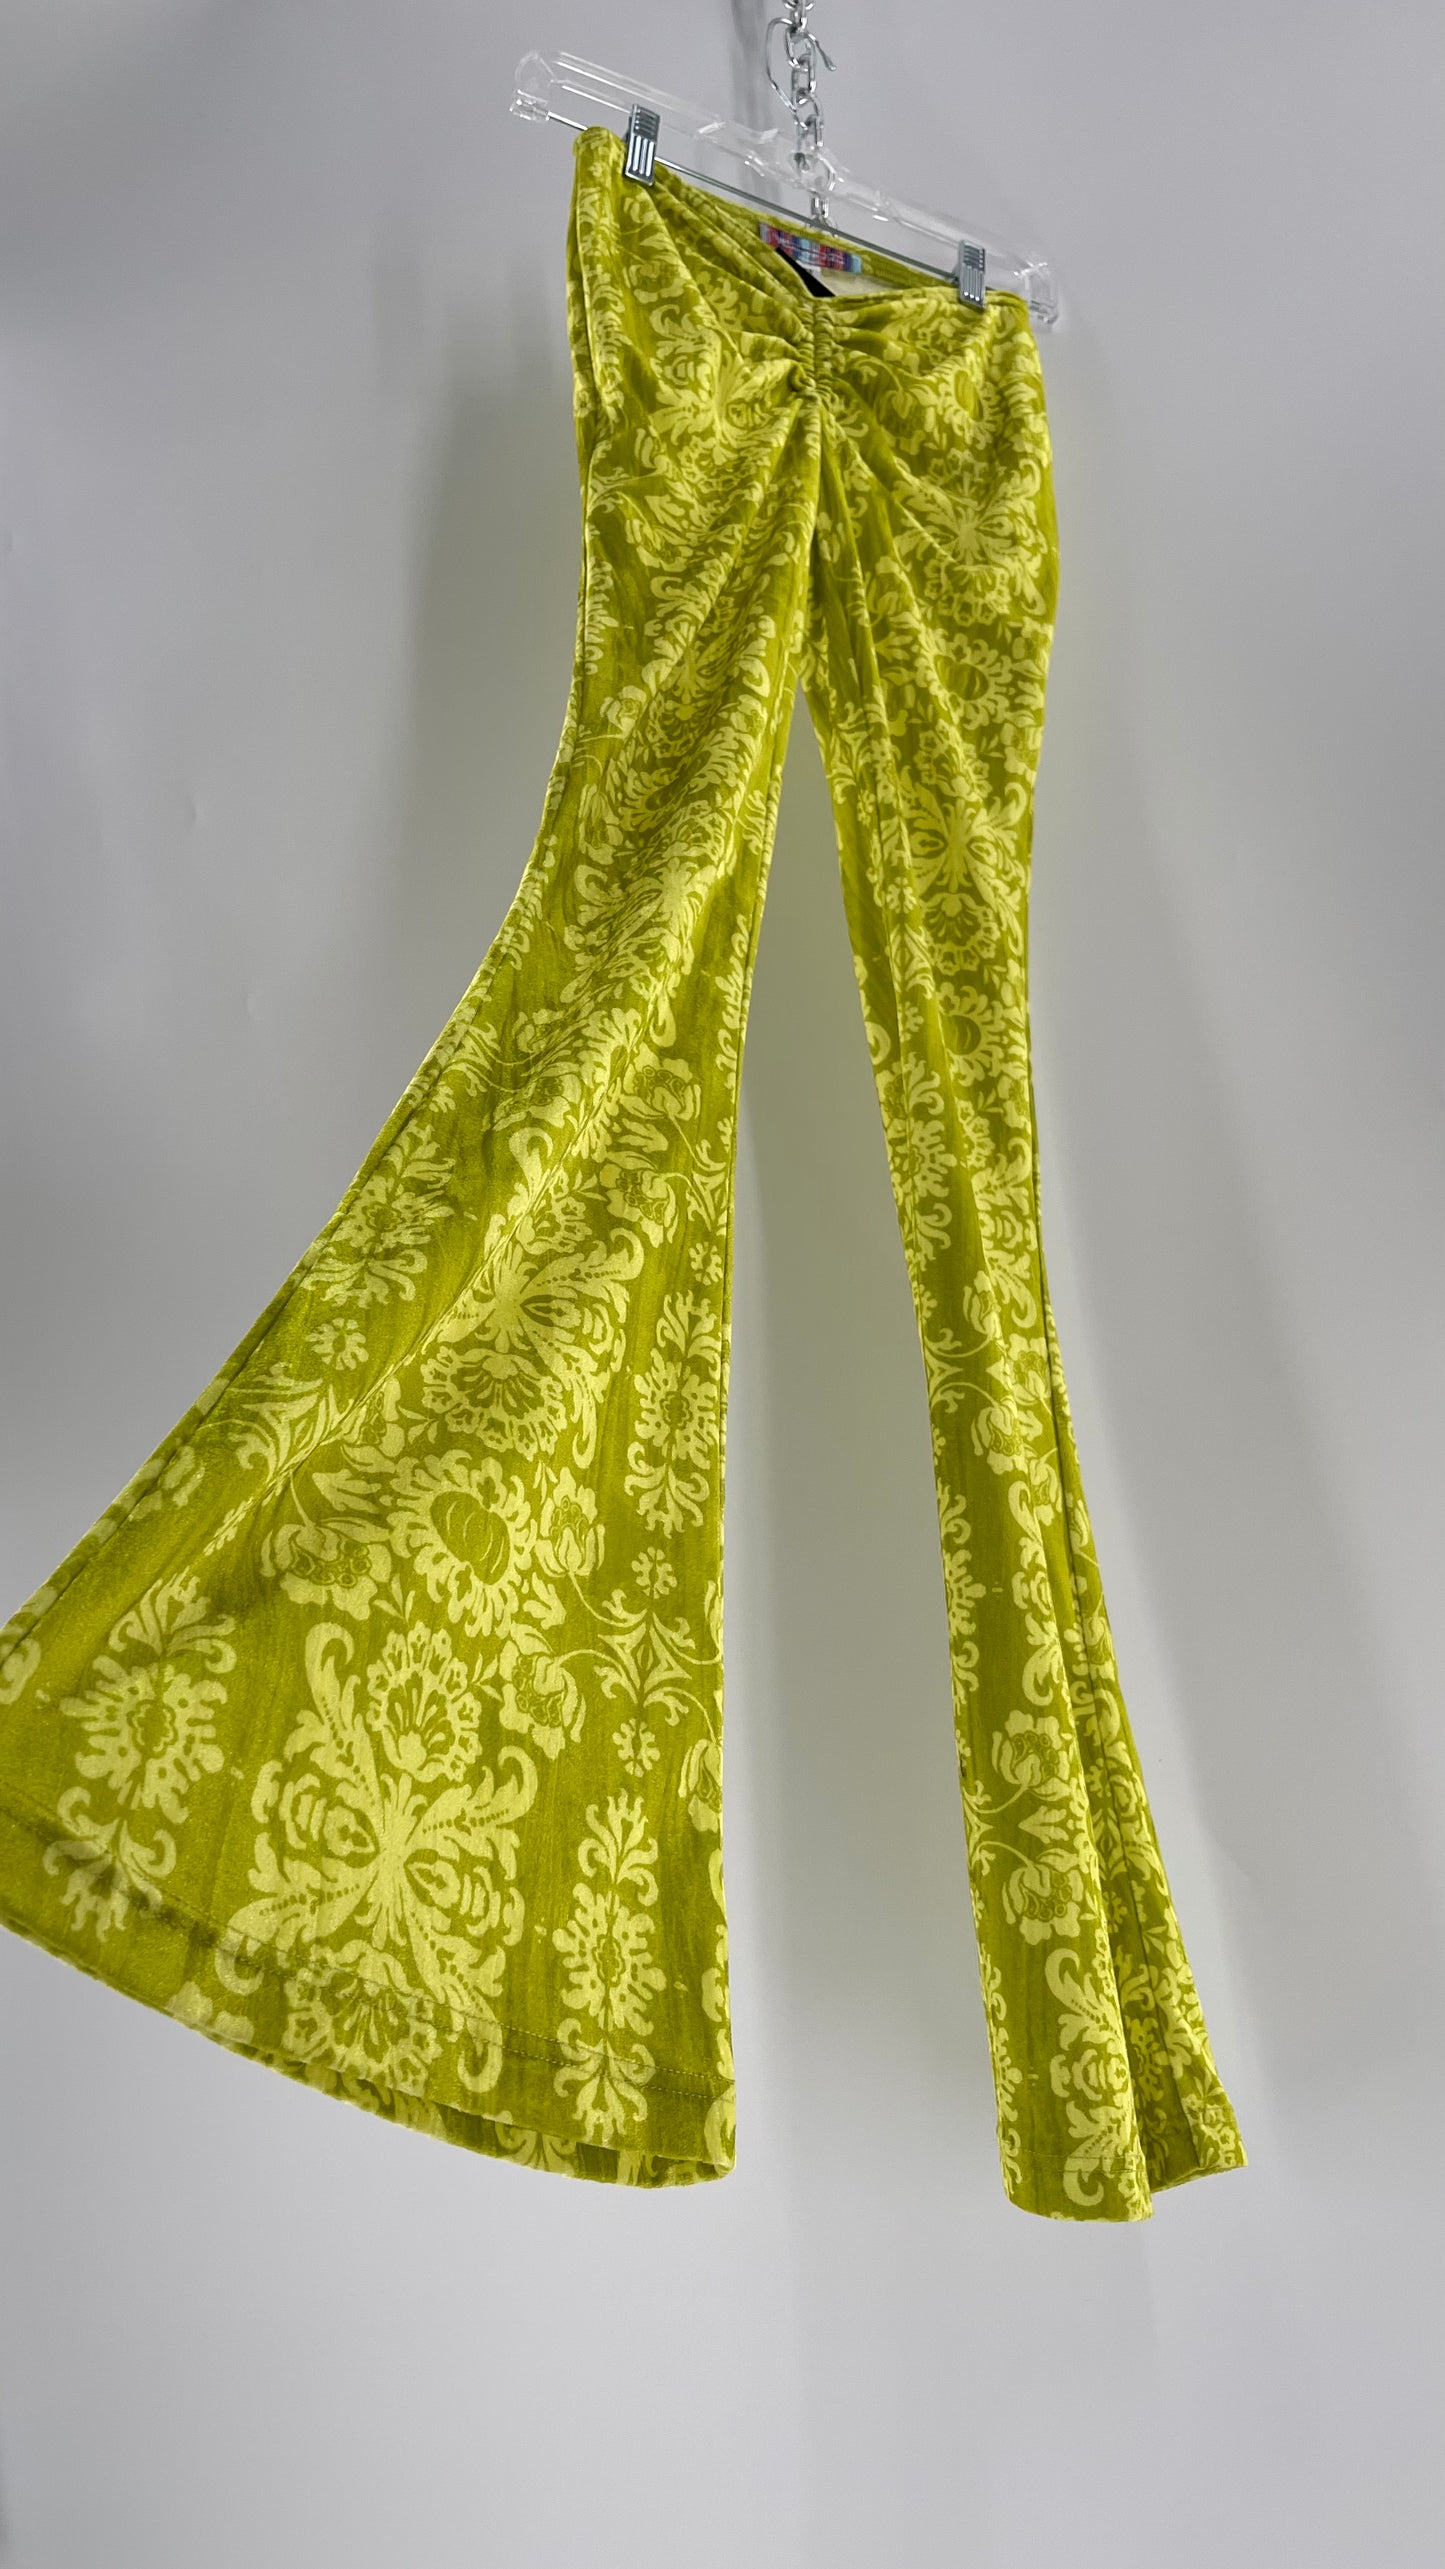 Urban Outfitters Chartreuse Green/Yellow Velvet Lace Patterned Flares with Scrunch Front  (XS)